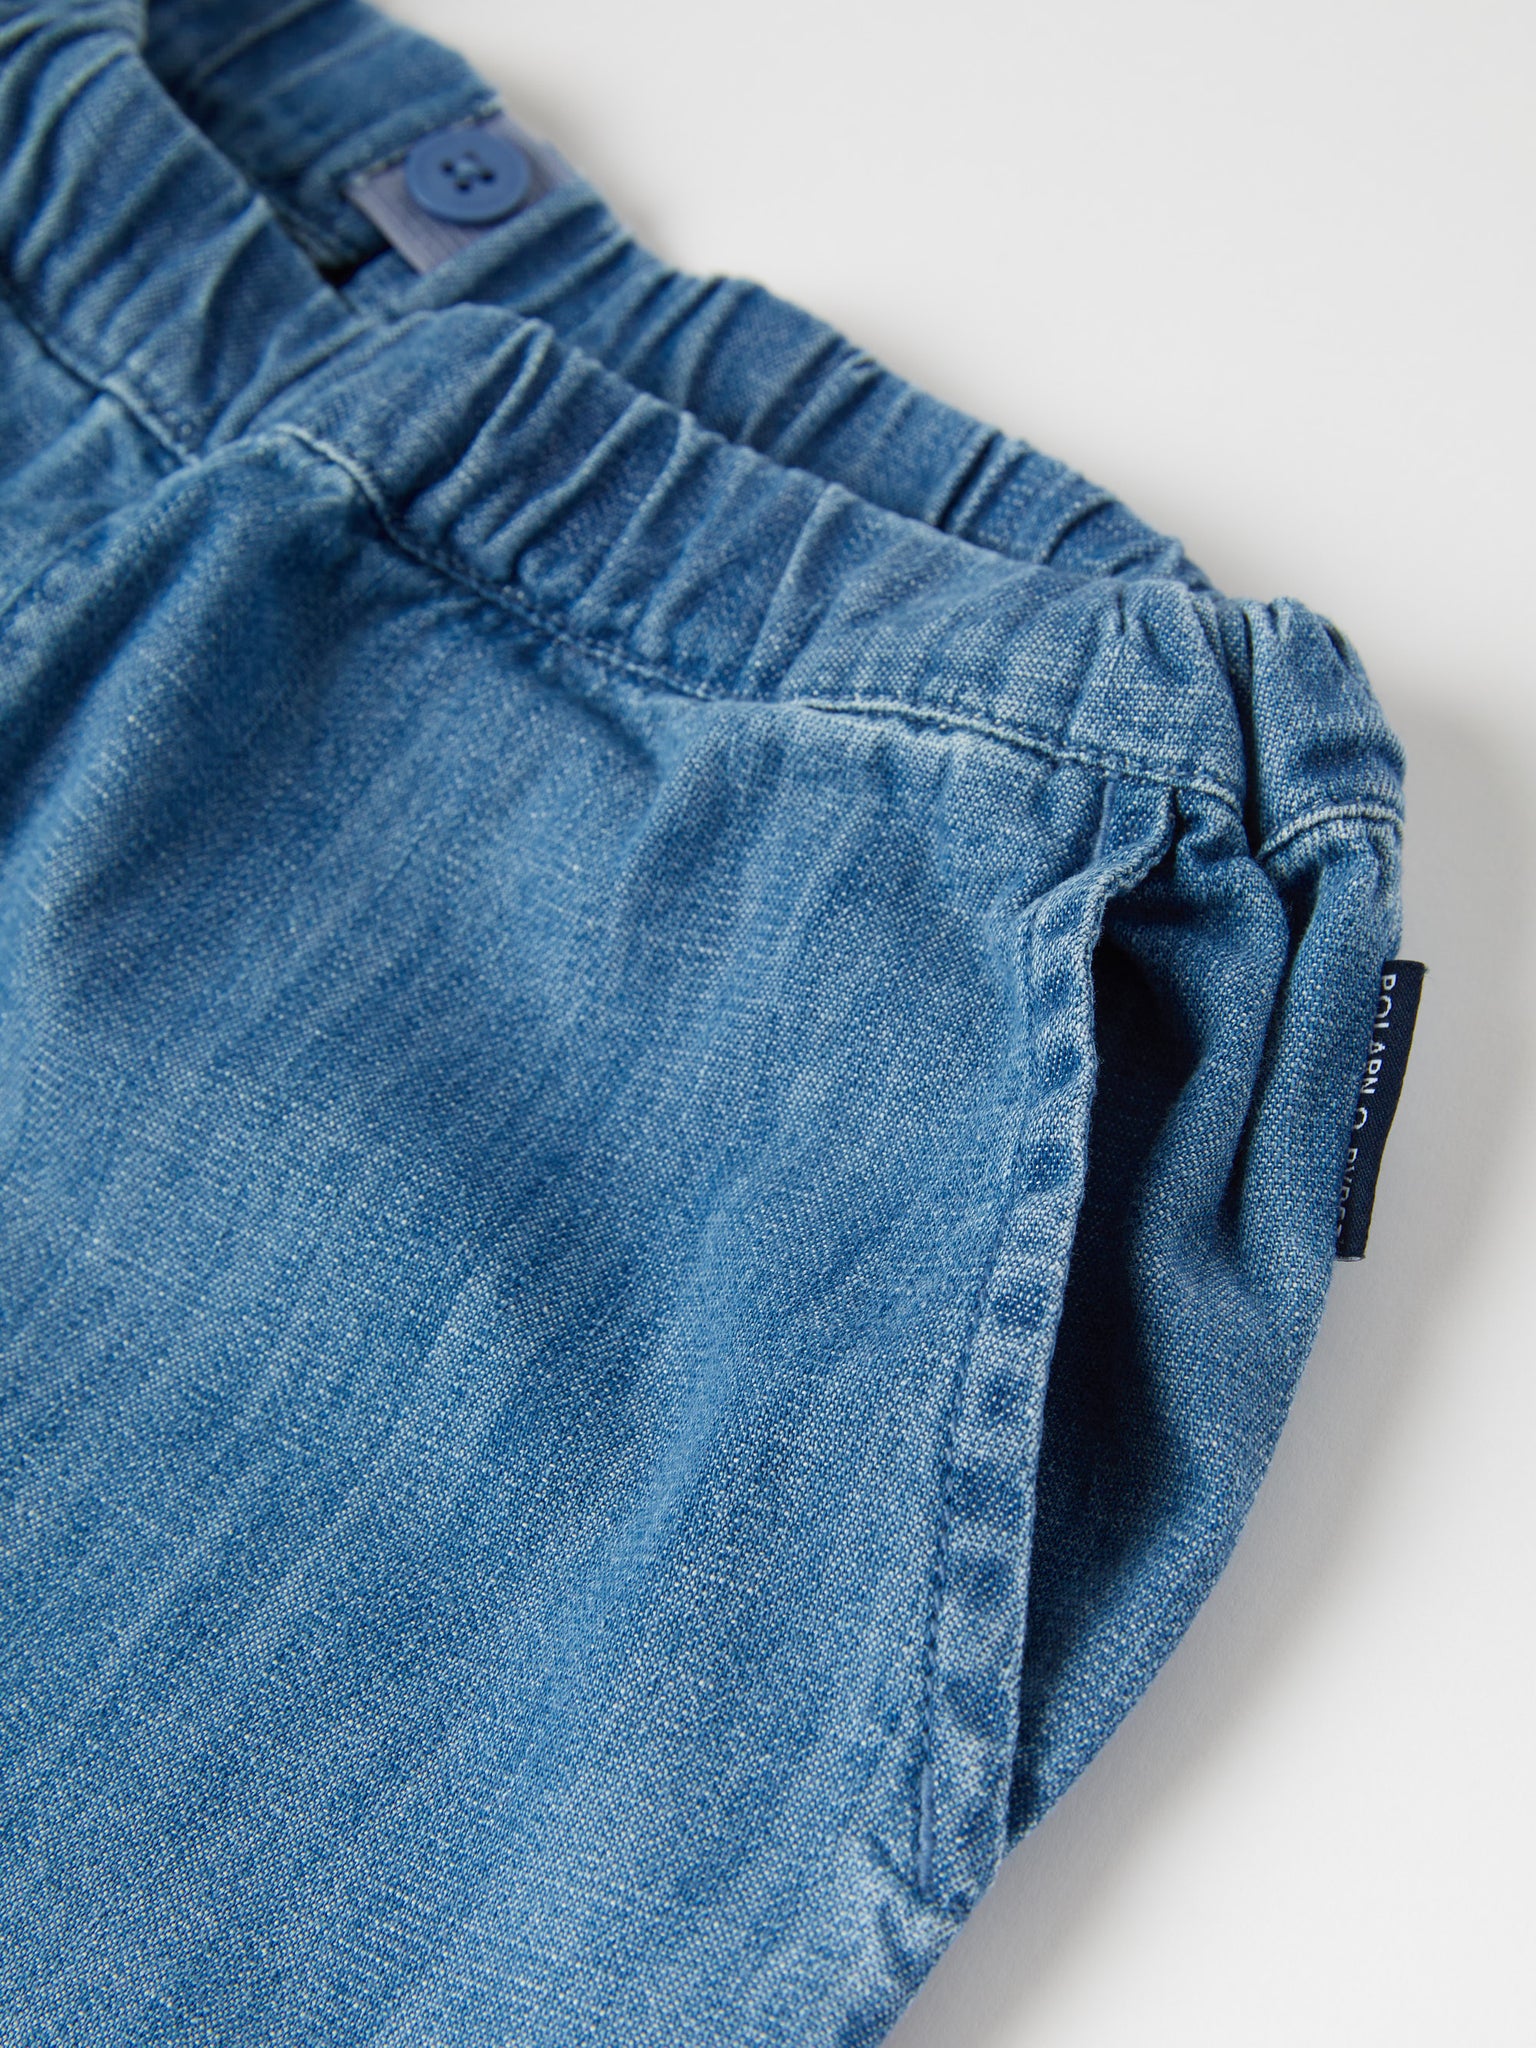 Denim Baby Trousers from the Polarn O. Pyret kidswear collection. The best ethical kids clothes